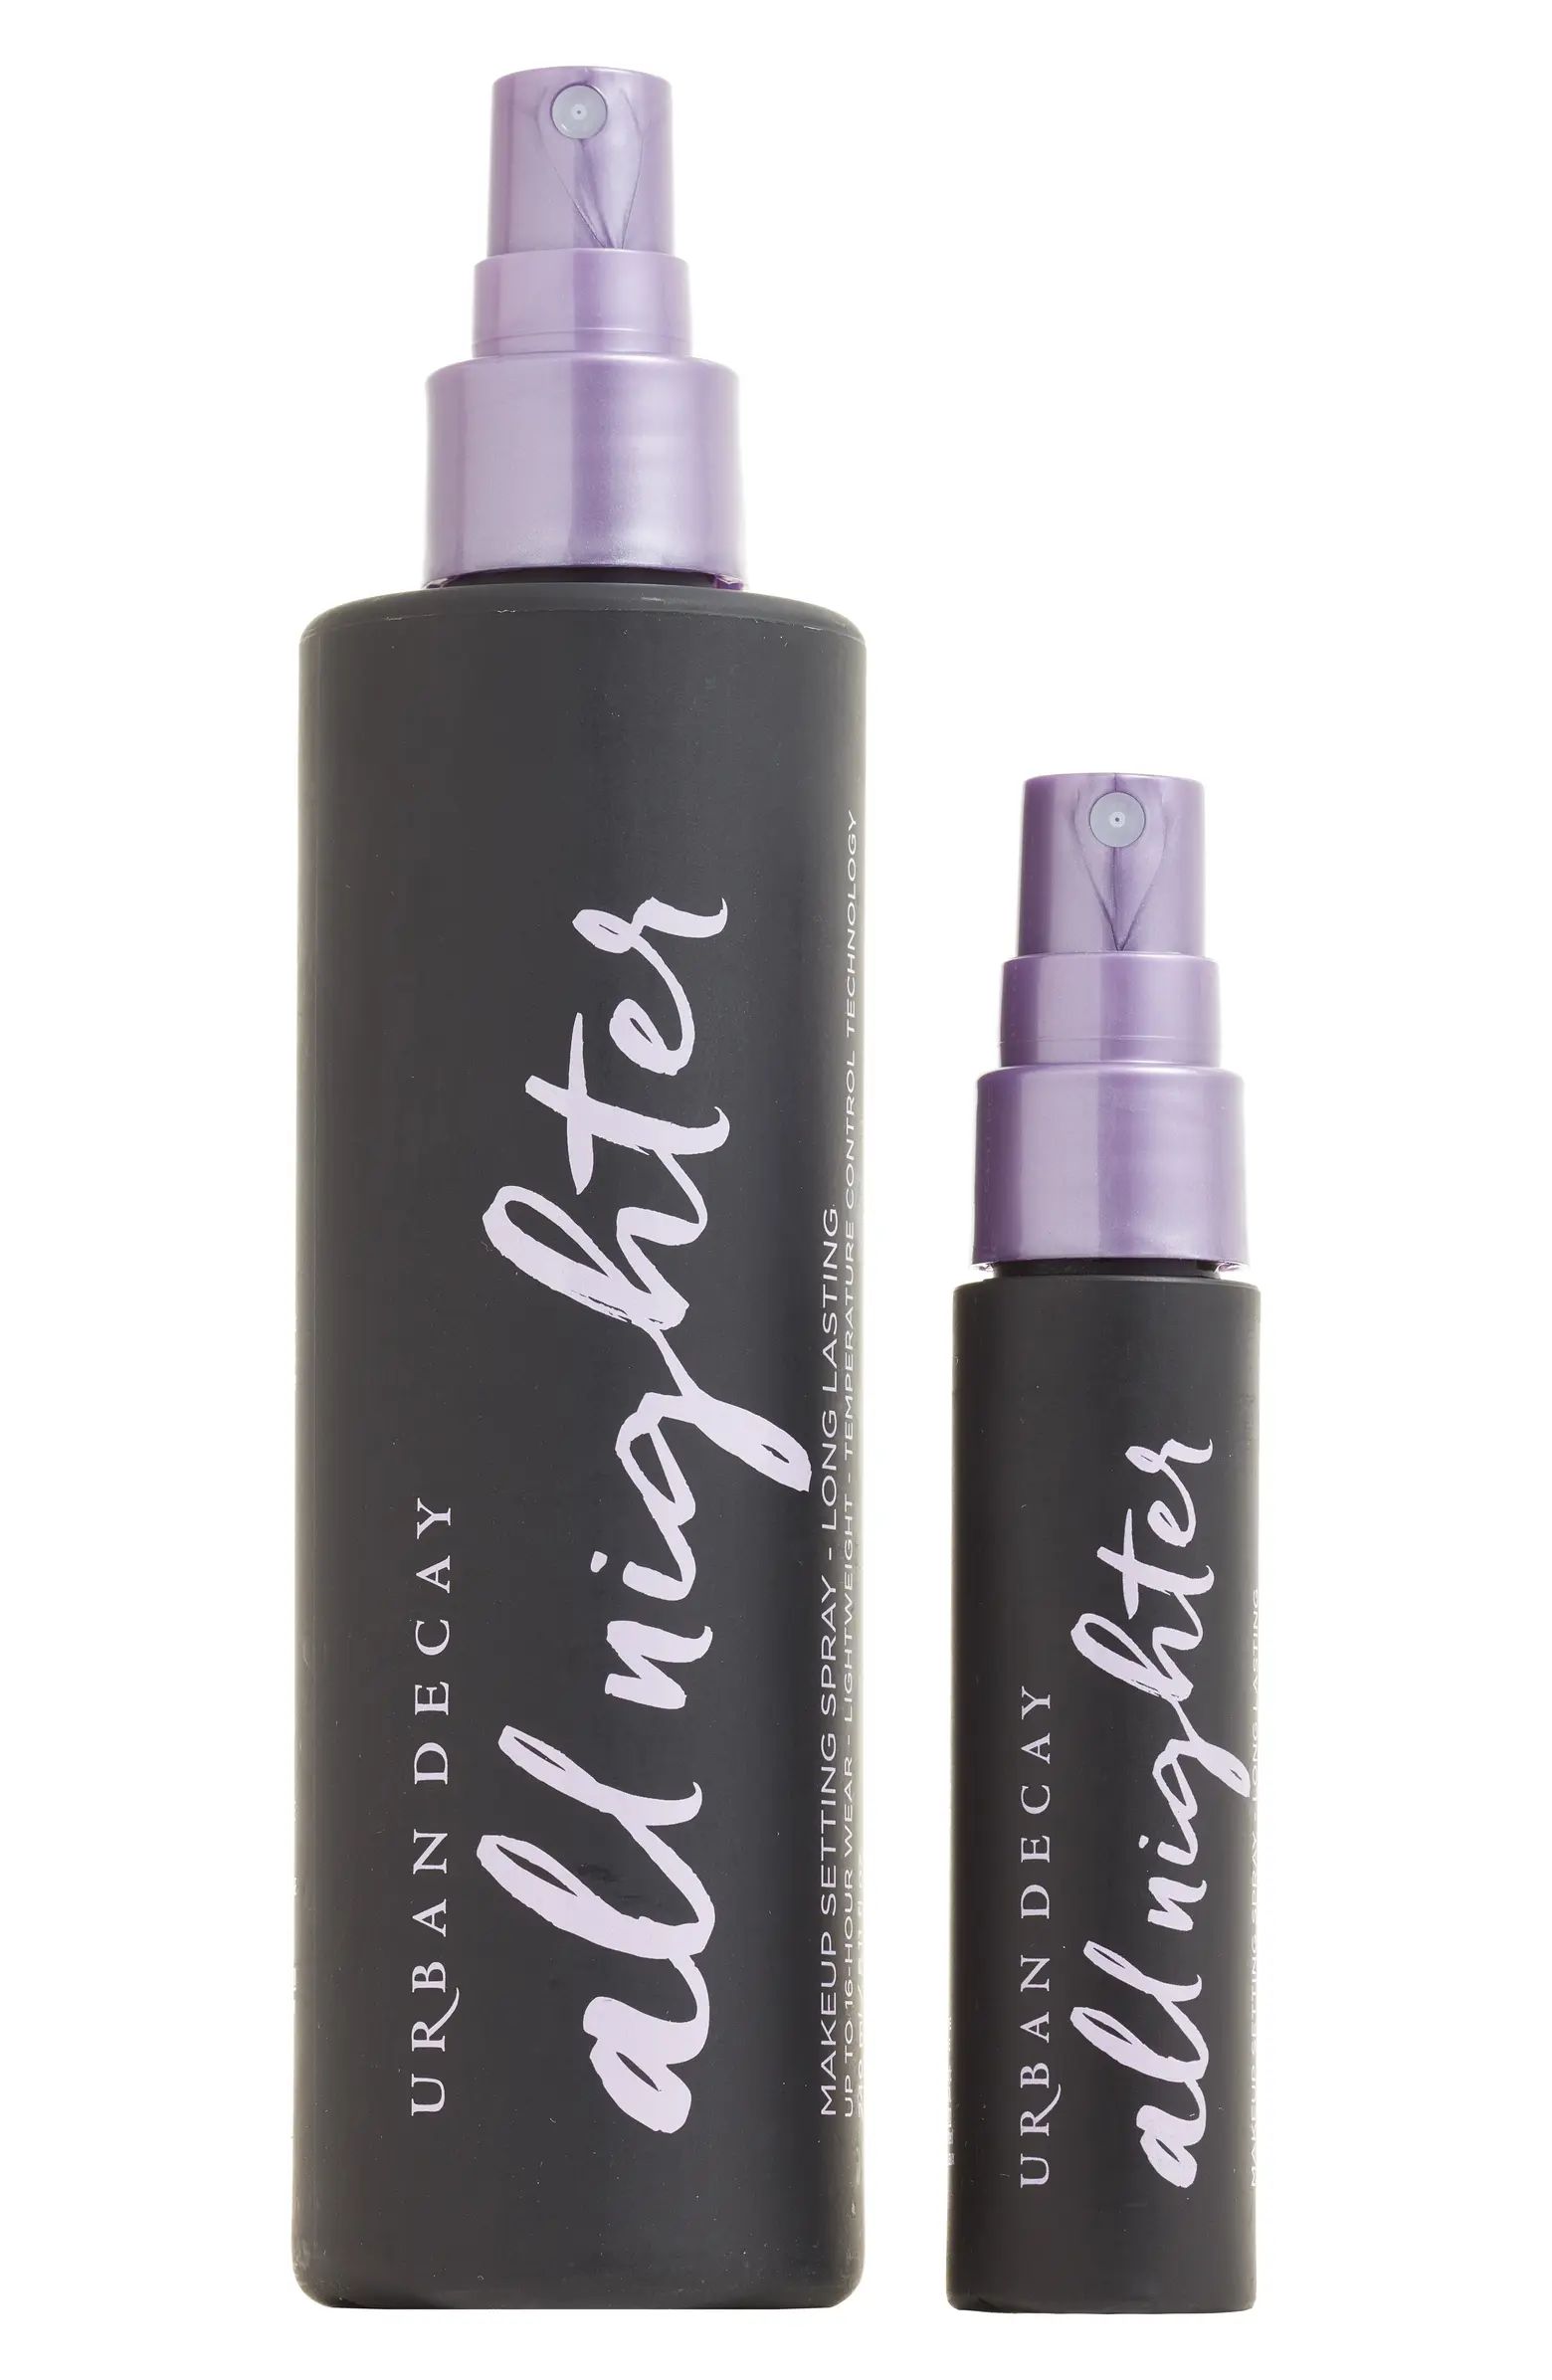 All Nighter Long Lasting Makeup Setting Spray Duo | Nordstrom